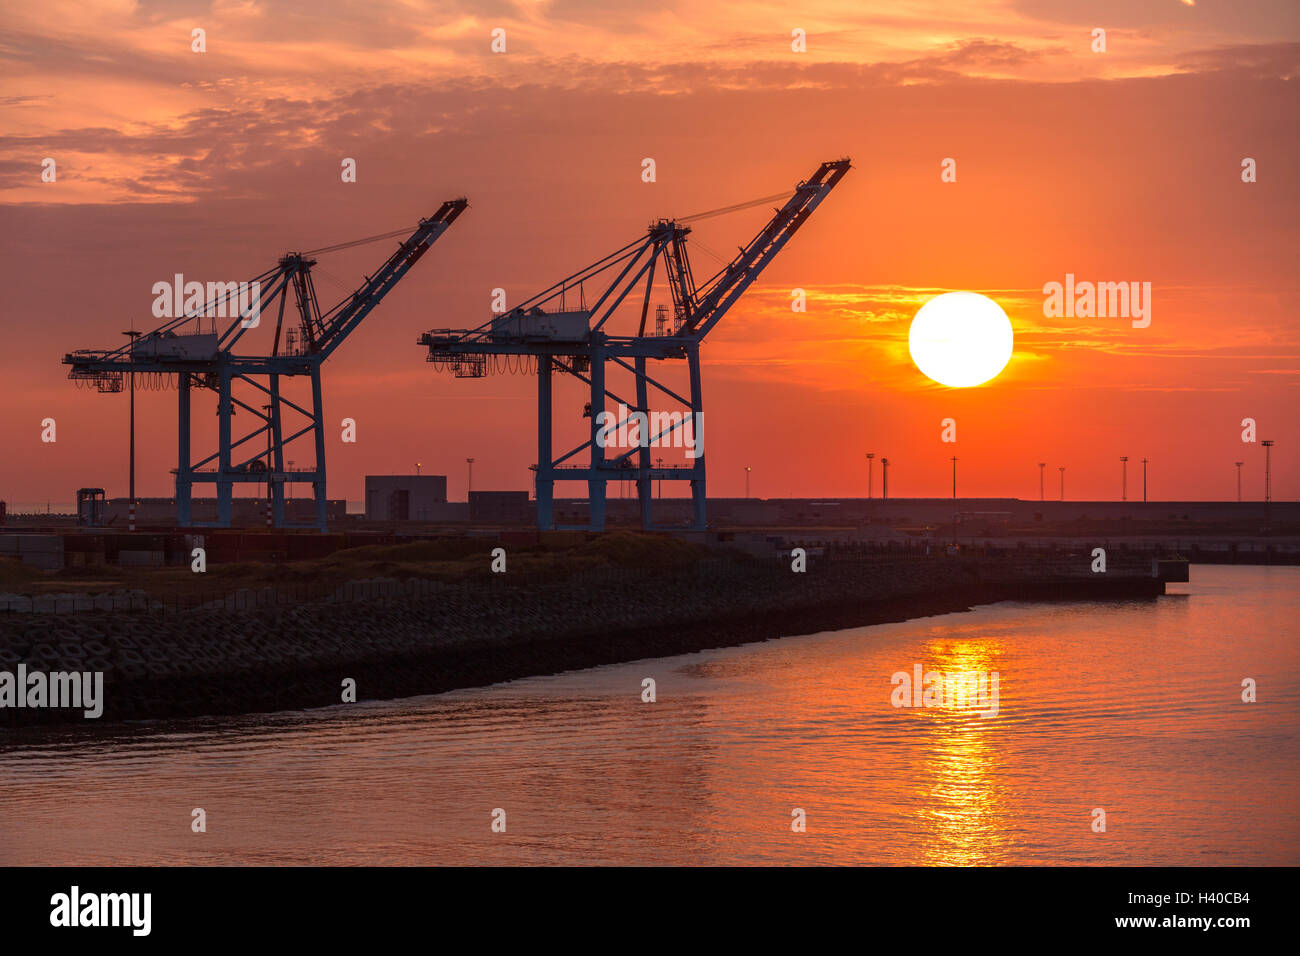 Sunset over one of the many docks in the Port of Zeebrugge in Belgium. Stock Photo